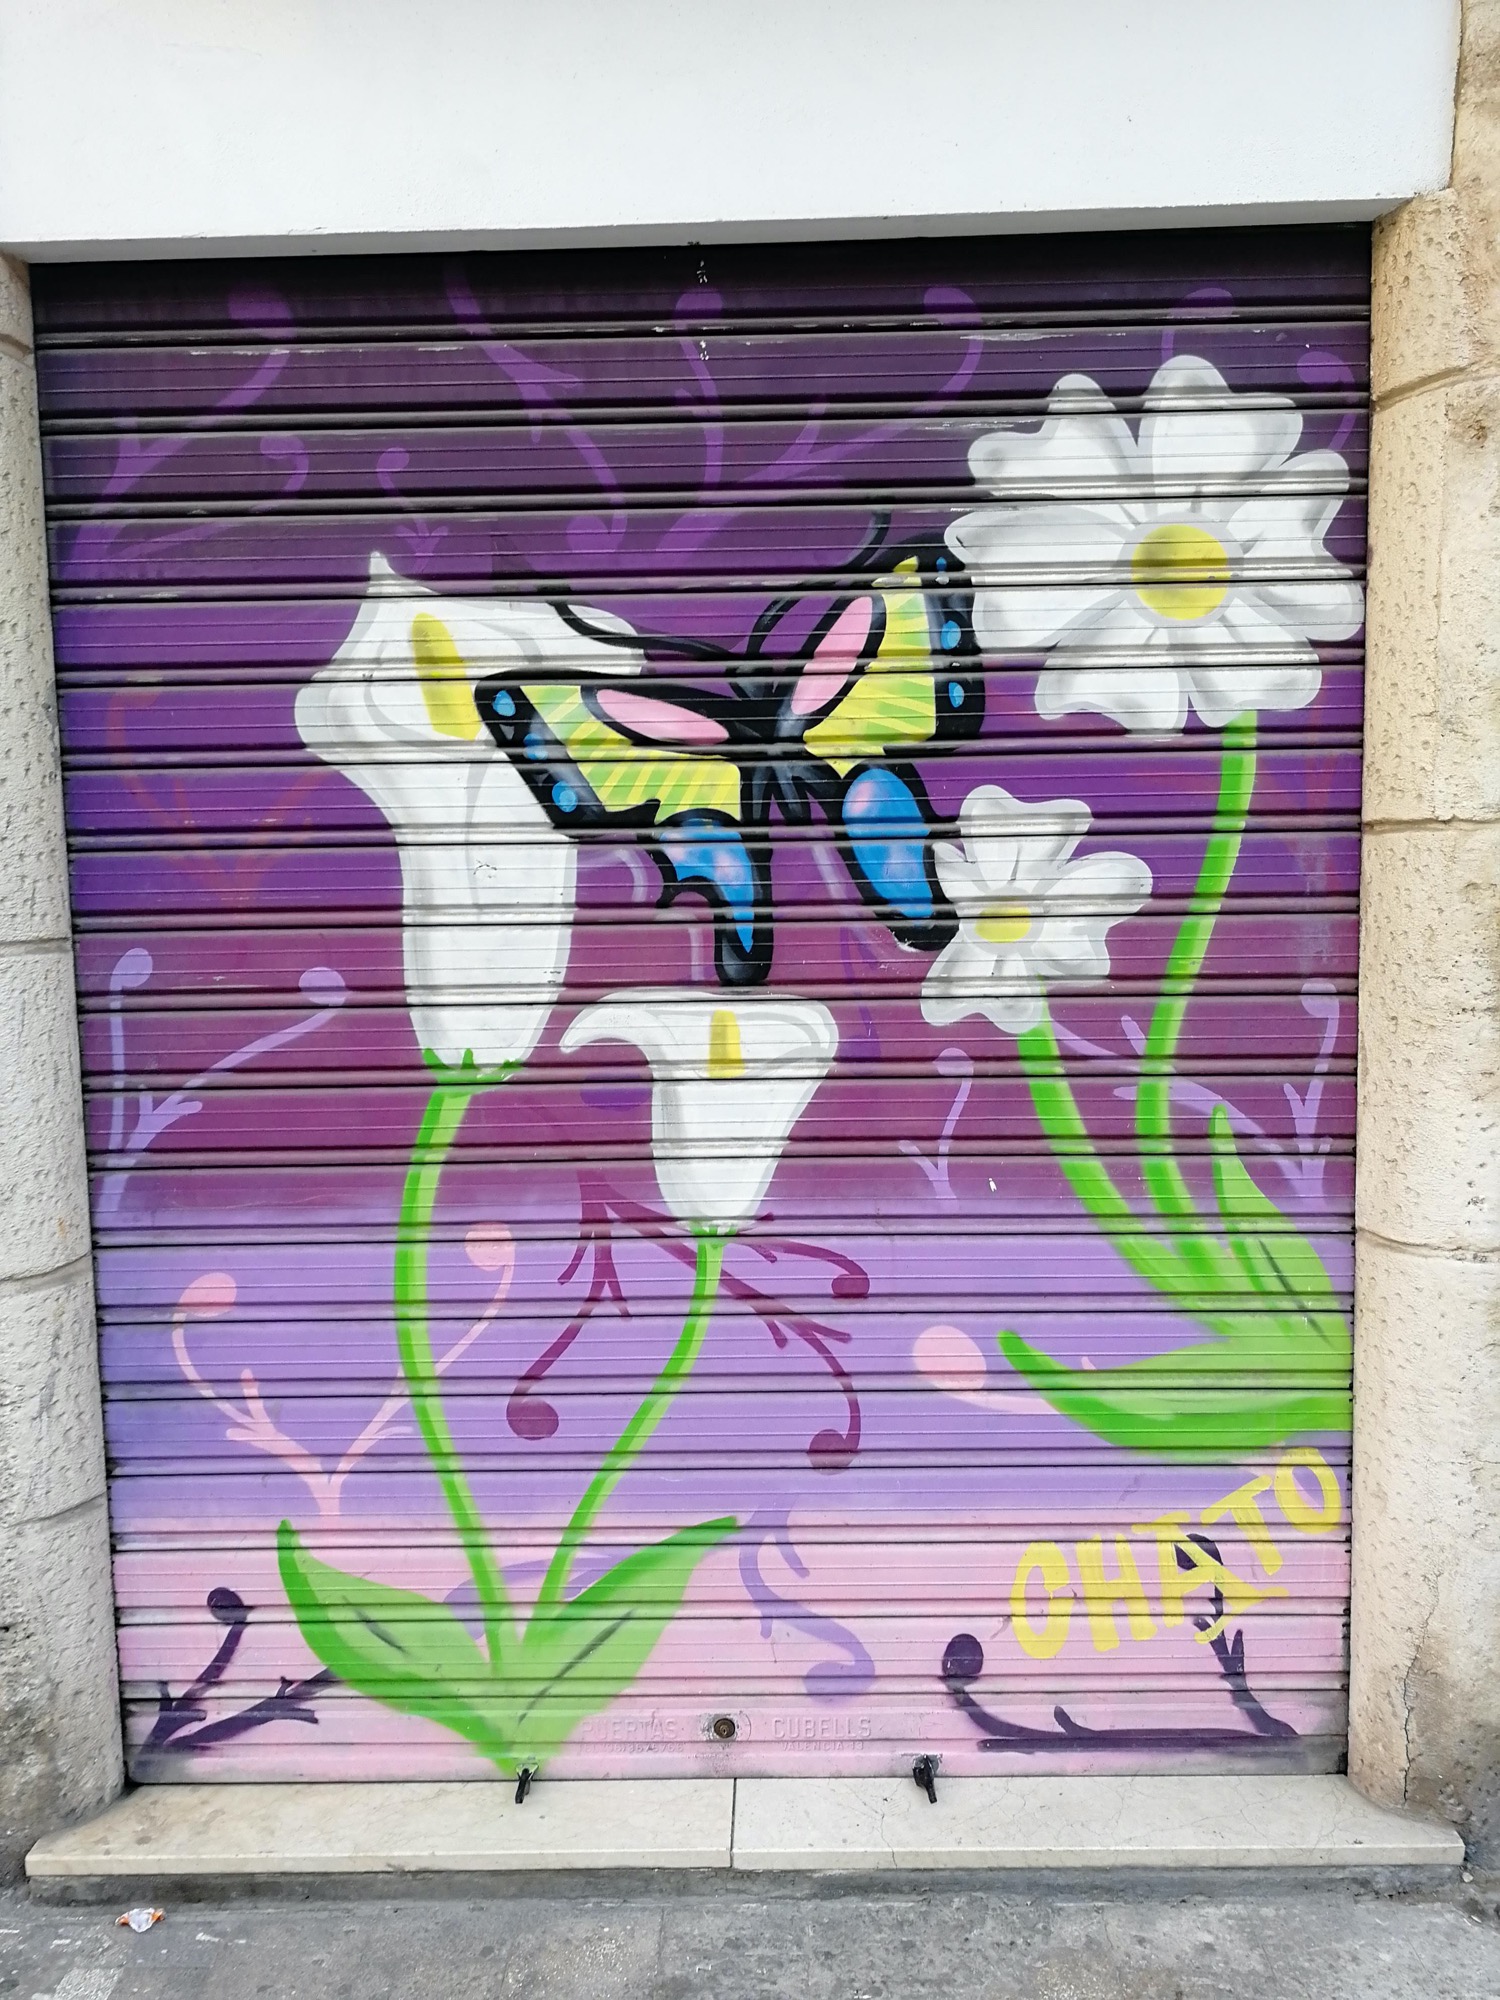 Graffiti 3376  captured by Rabot in València Spain